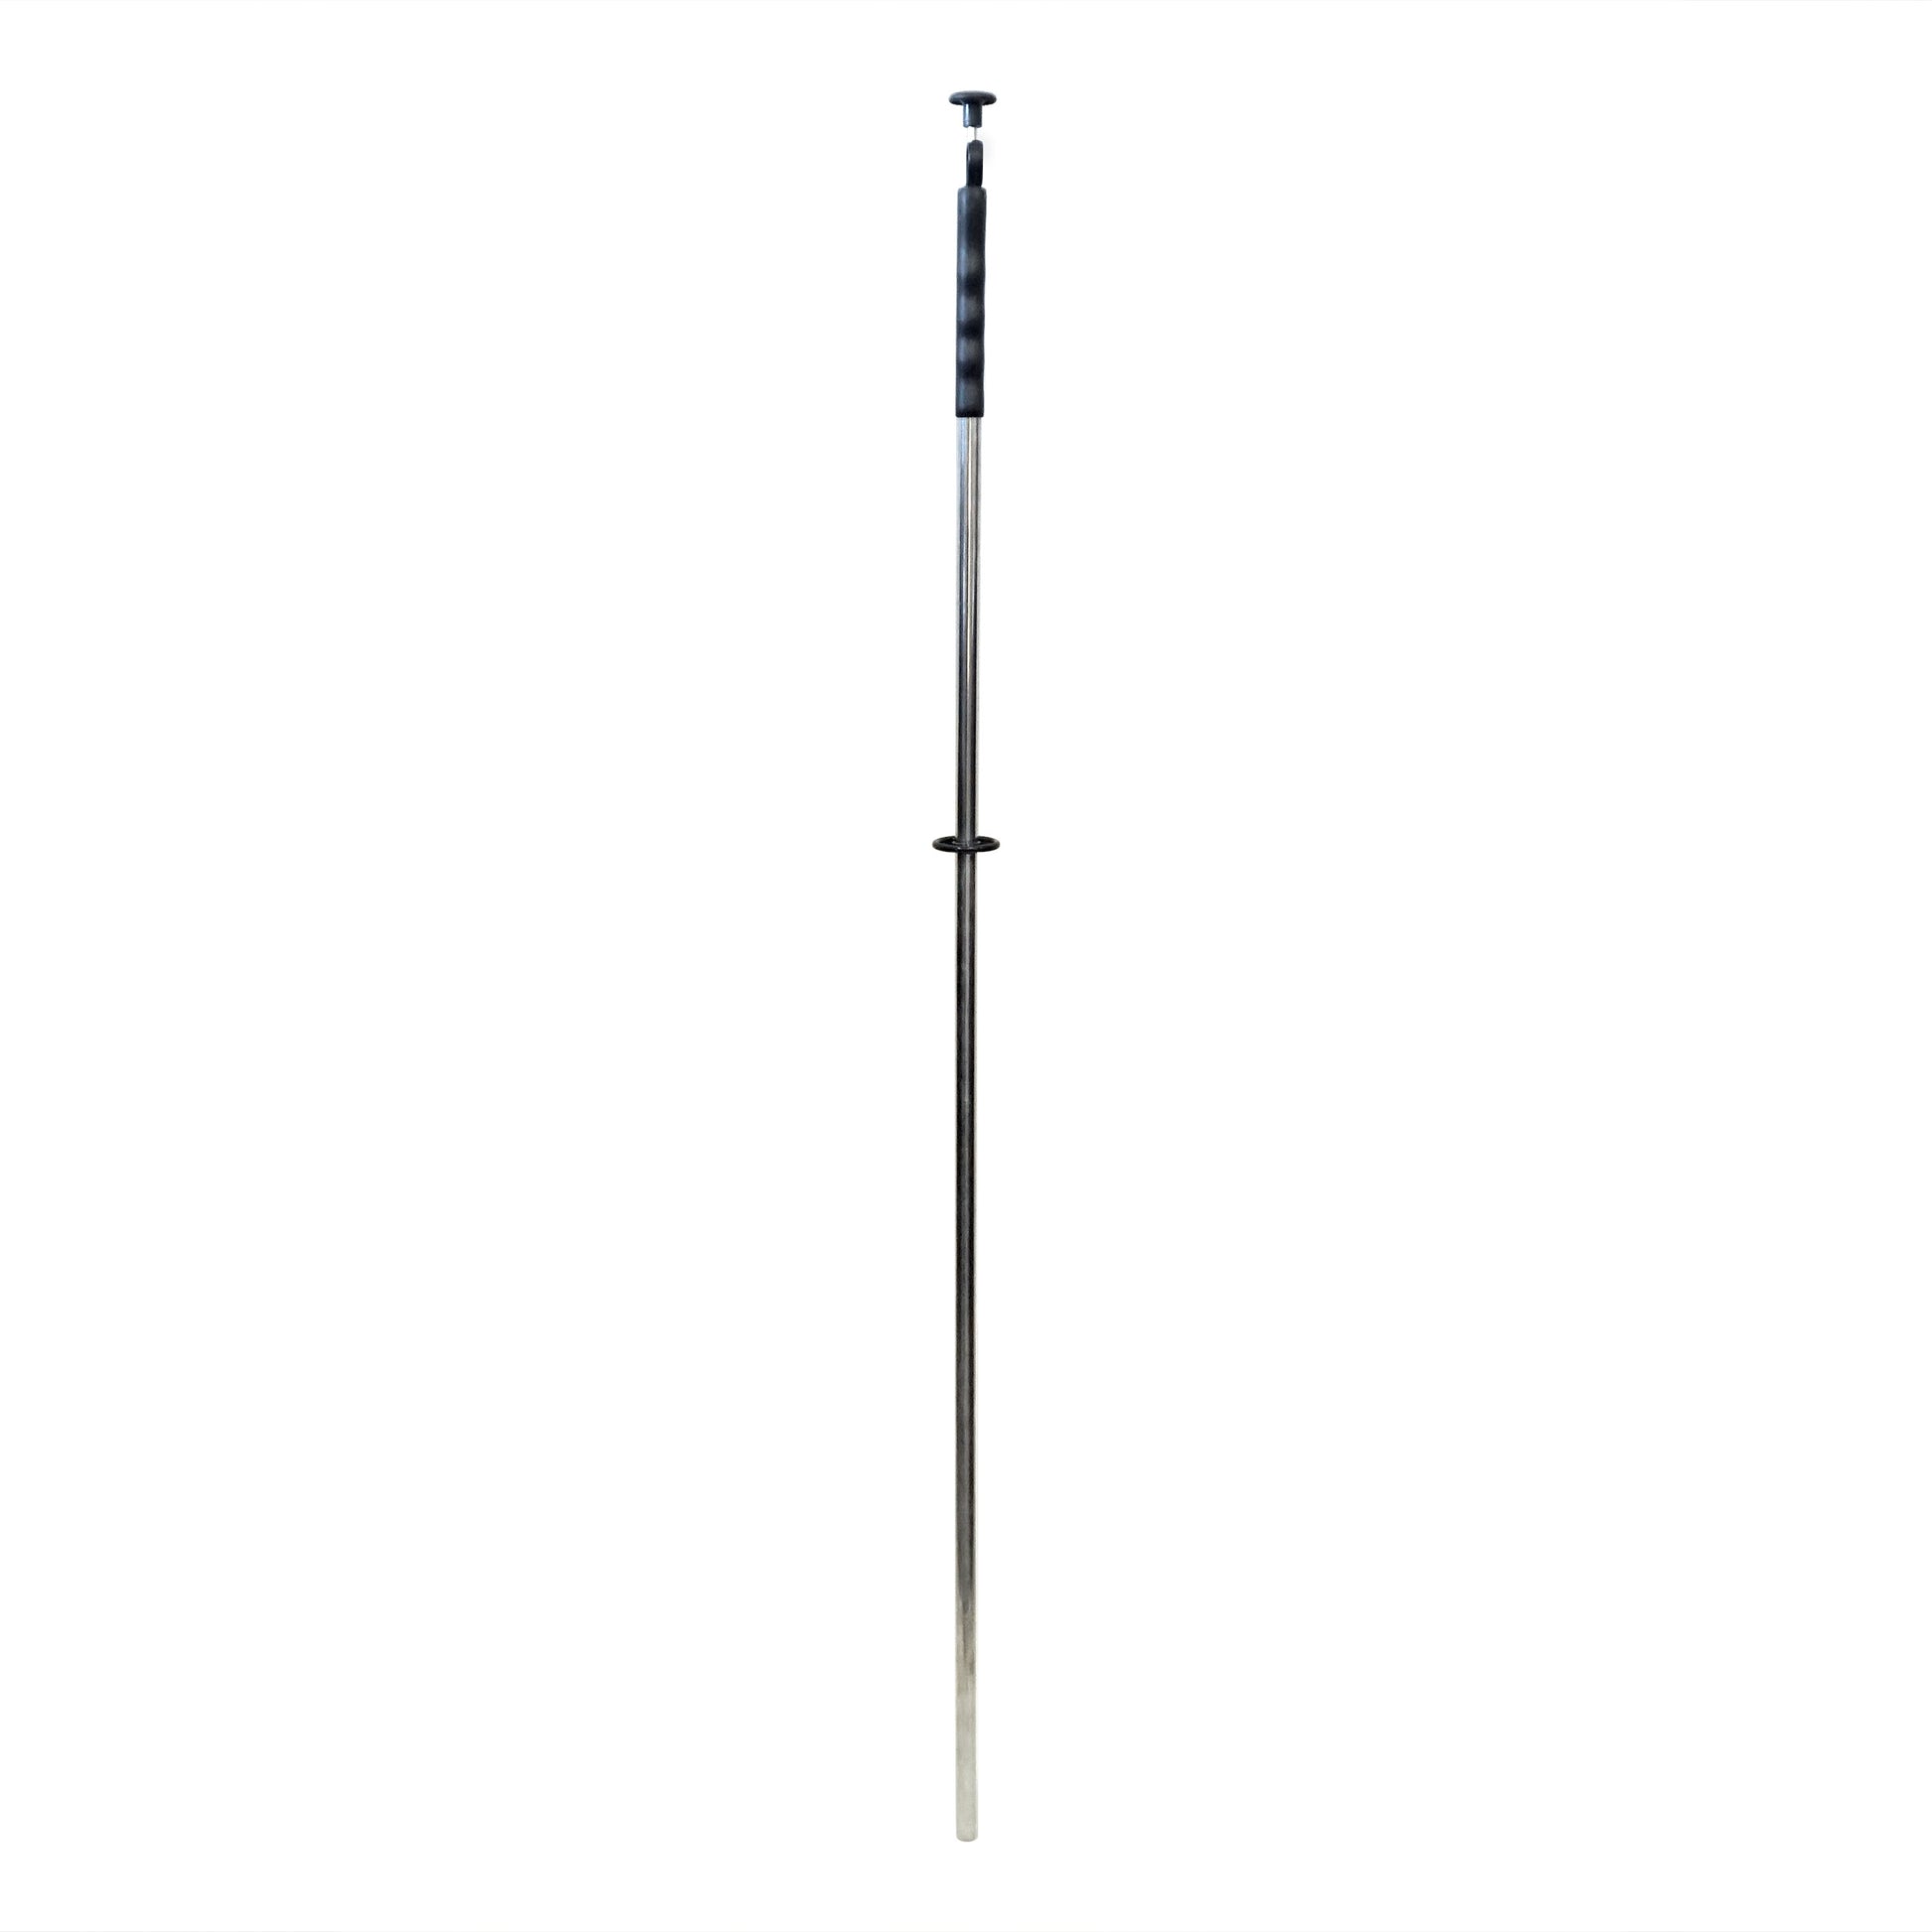 Load image into Gallery viewer, RHS03 Extra-long Magnetic Retrieving Baton with Release - Side View